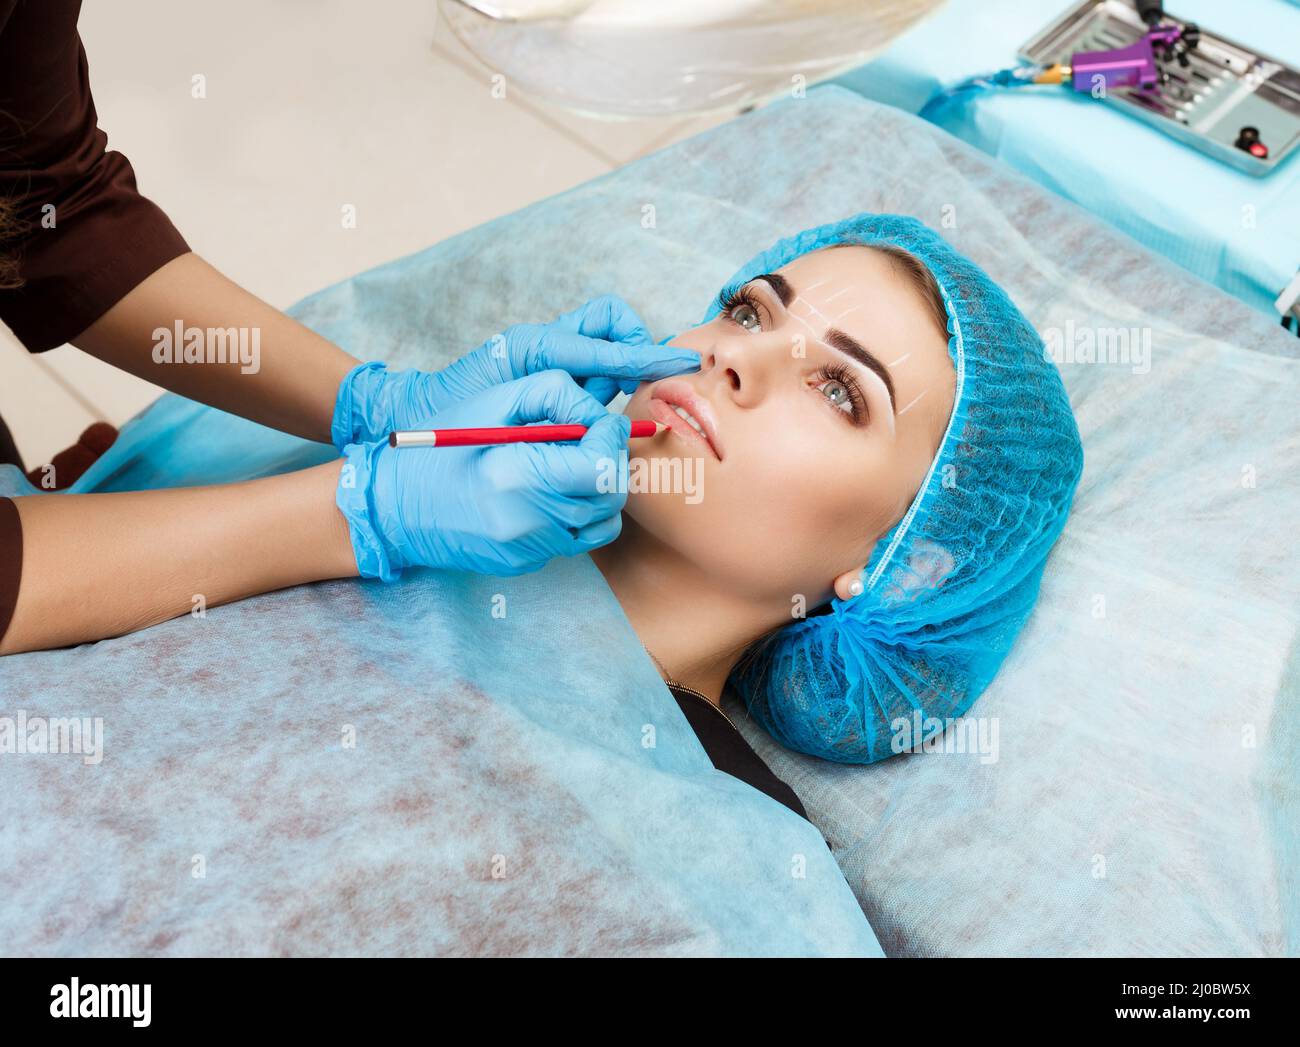 Cosmetologist making permanent makeup on woman's face Stock Photo